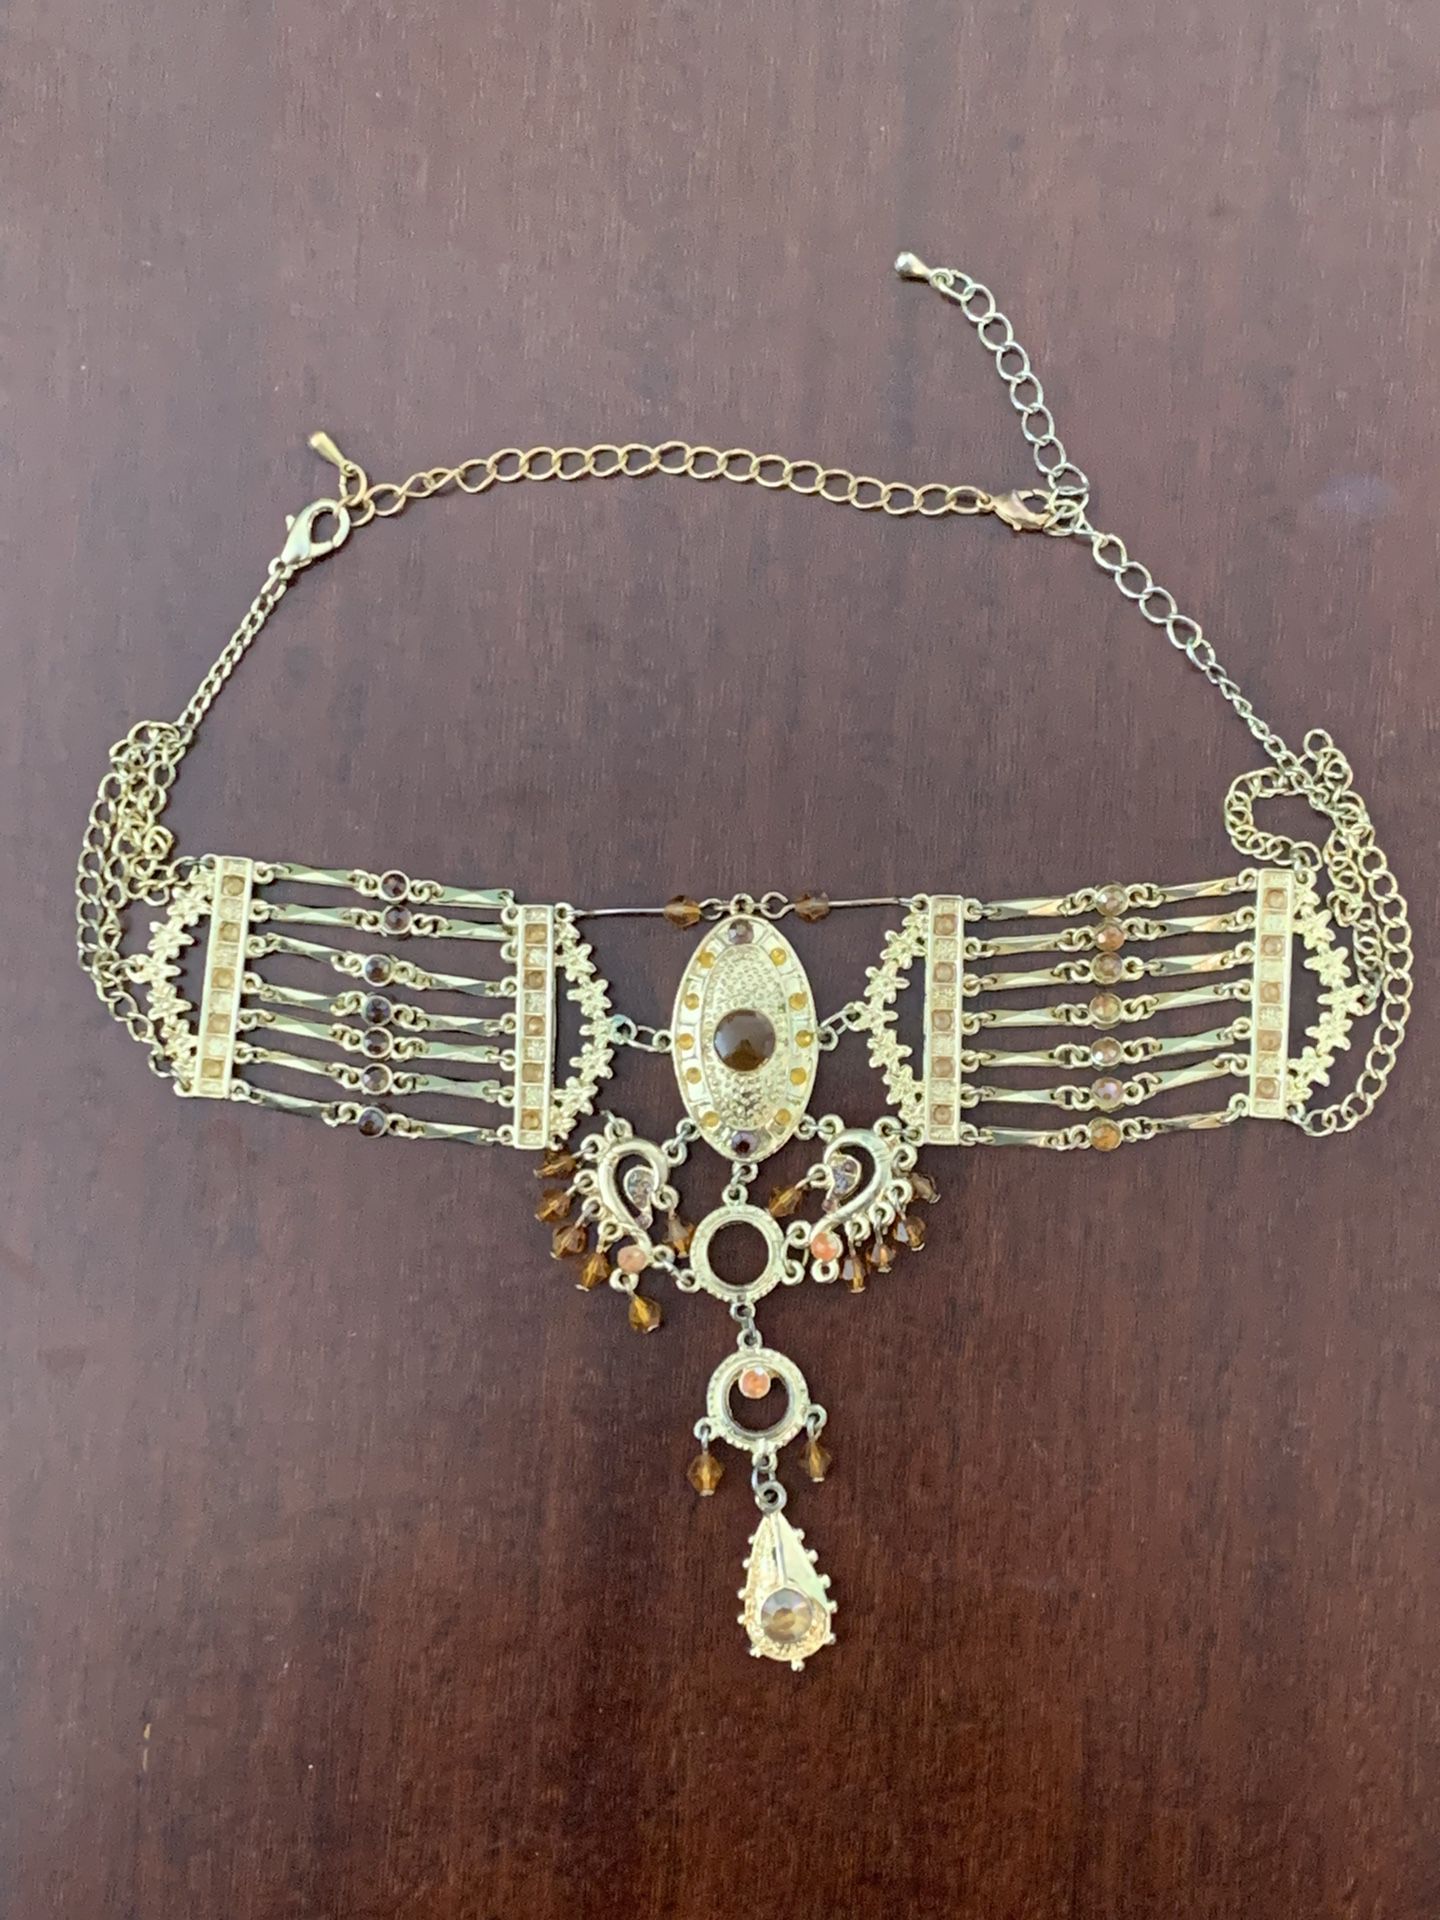 East Indian Style Collar Necklace 